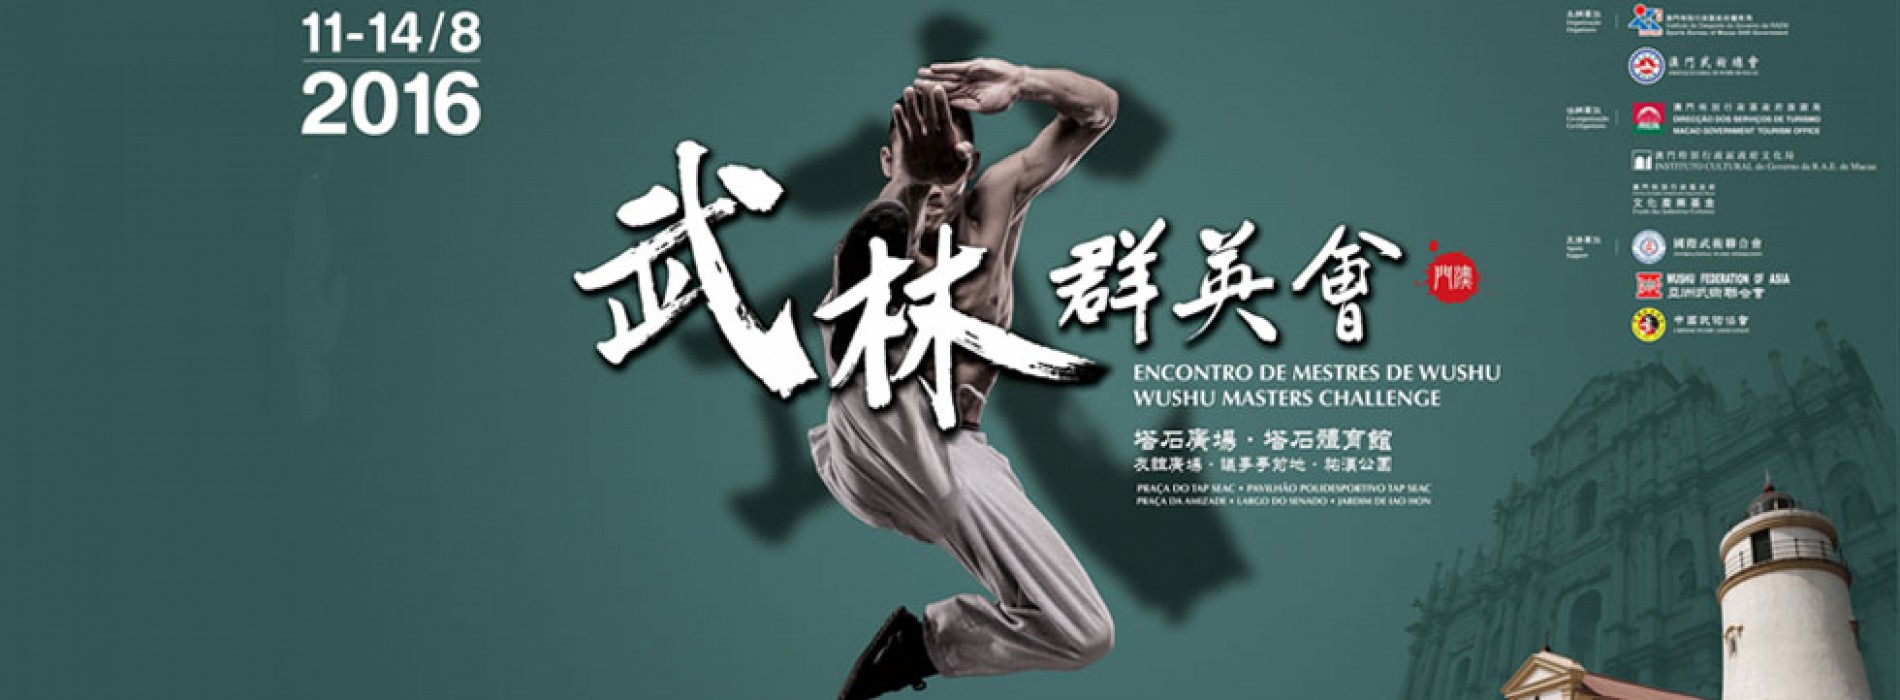 Macao to witness the 14th Wushu World Championship this August 2016